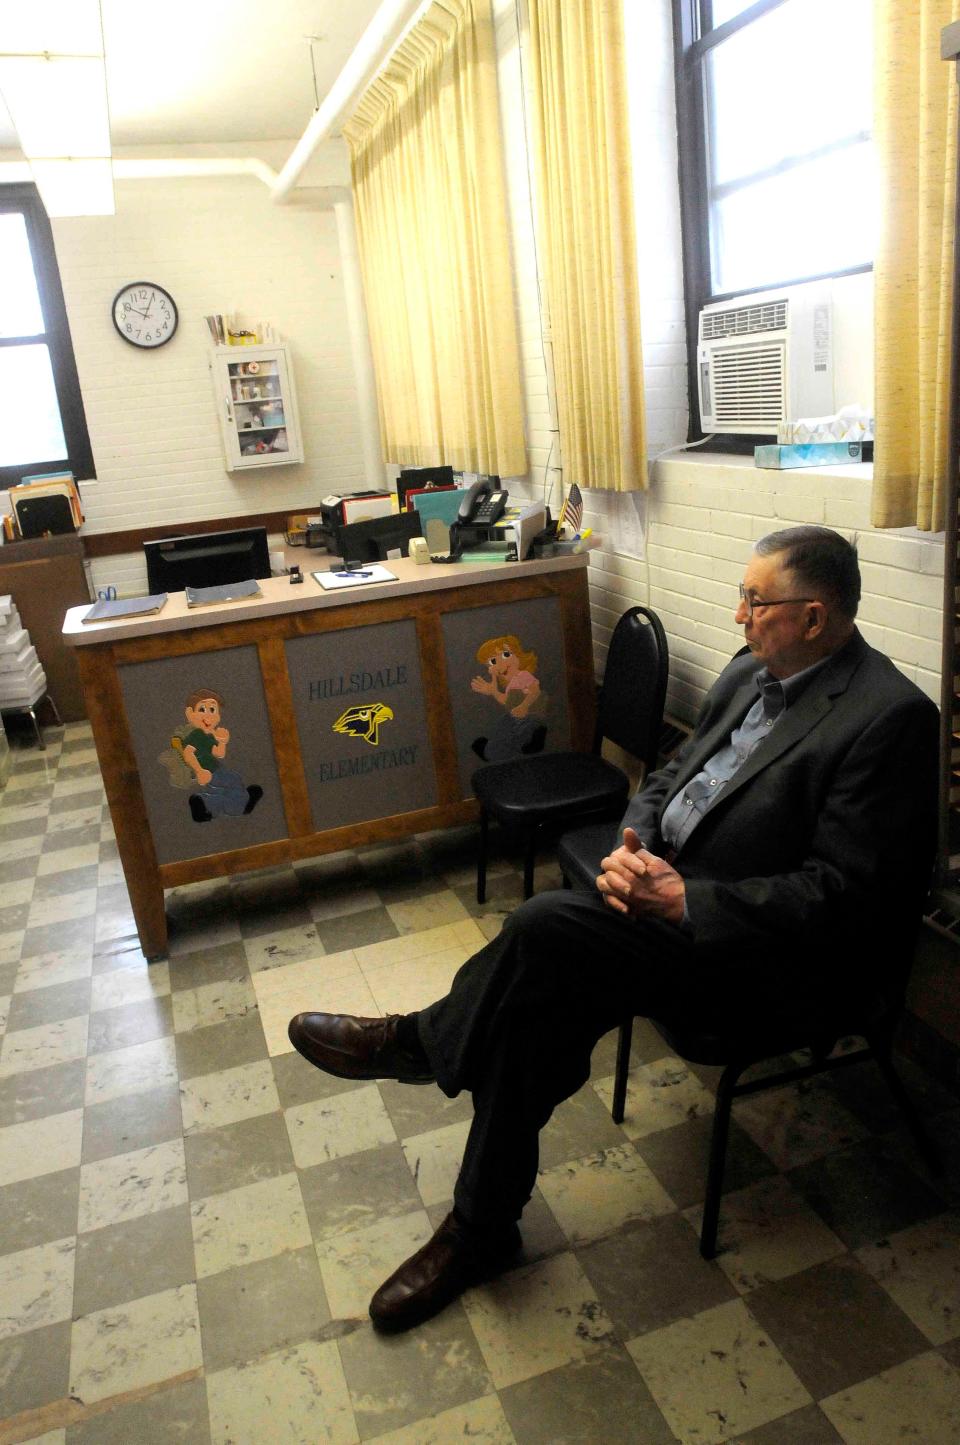 Former Principal Gene Yeater sits in the office at Hillsdale Elementary. The building was constructed in 1928.